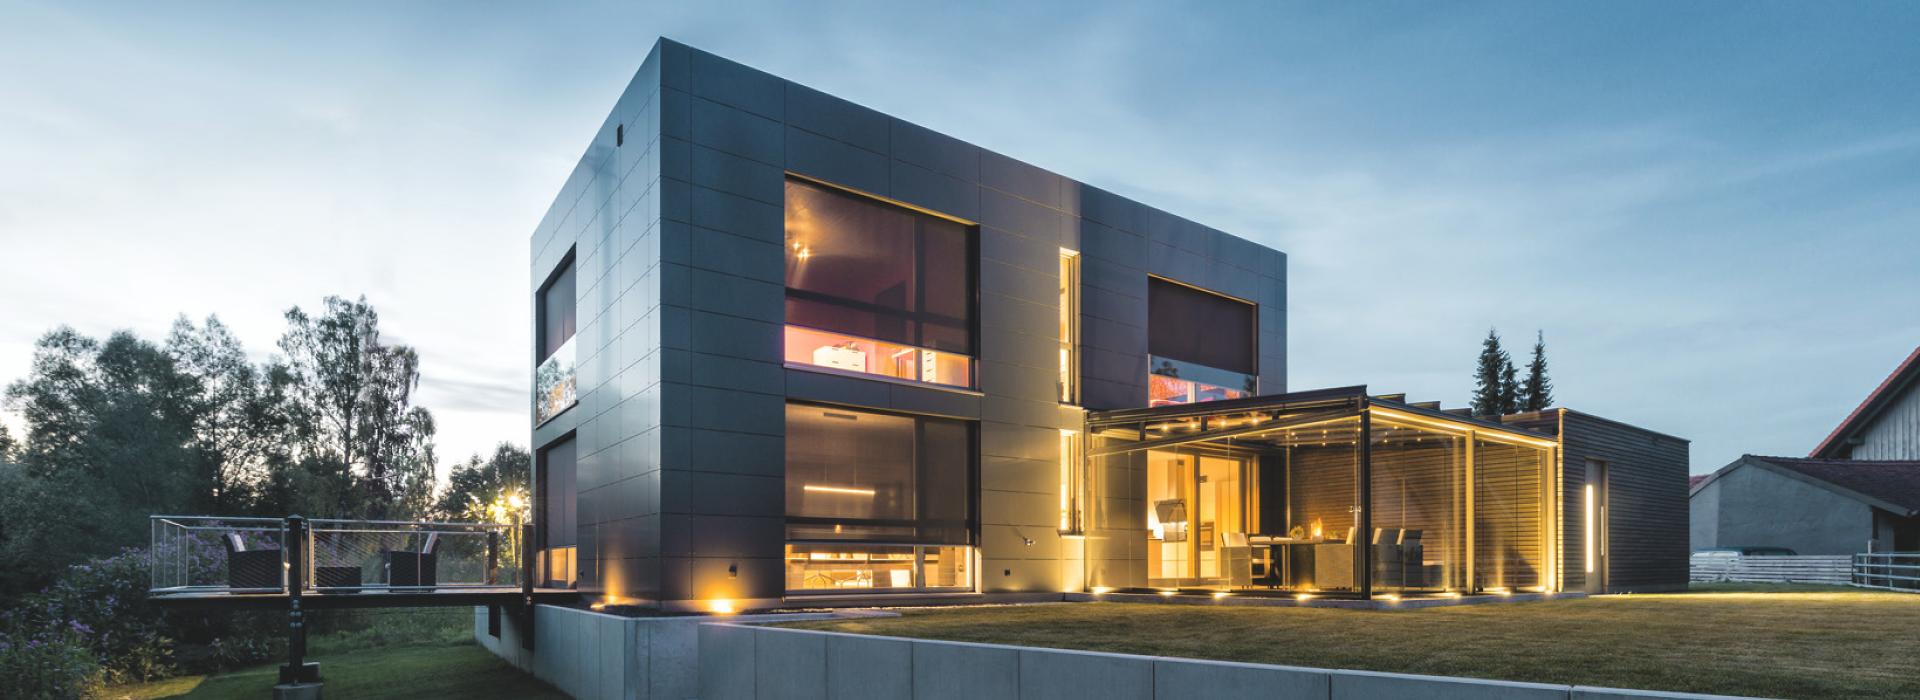 Modern house with interior lighting and lowered front-mounted textile screens in the twilight